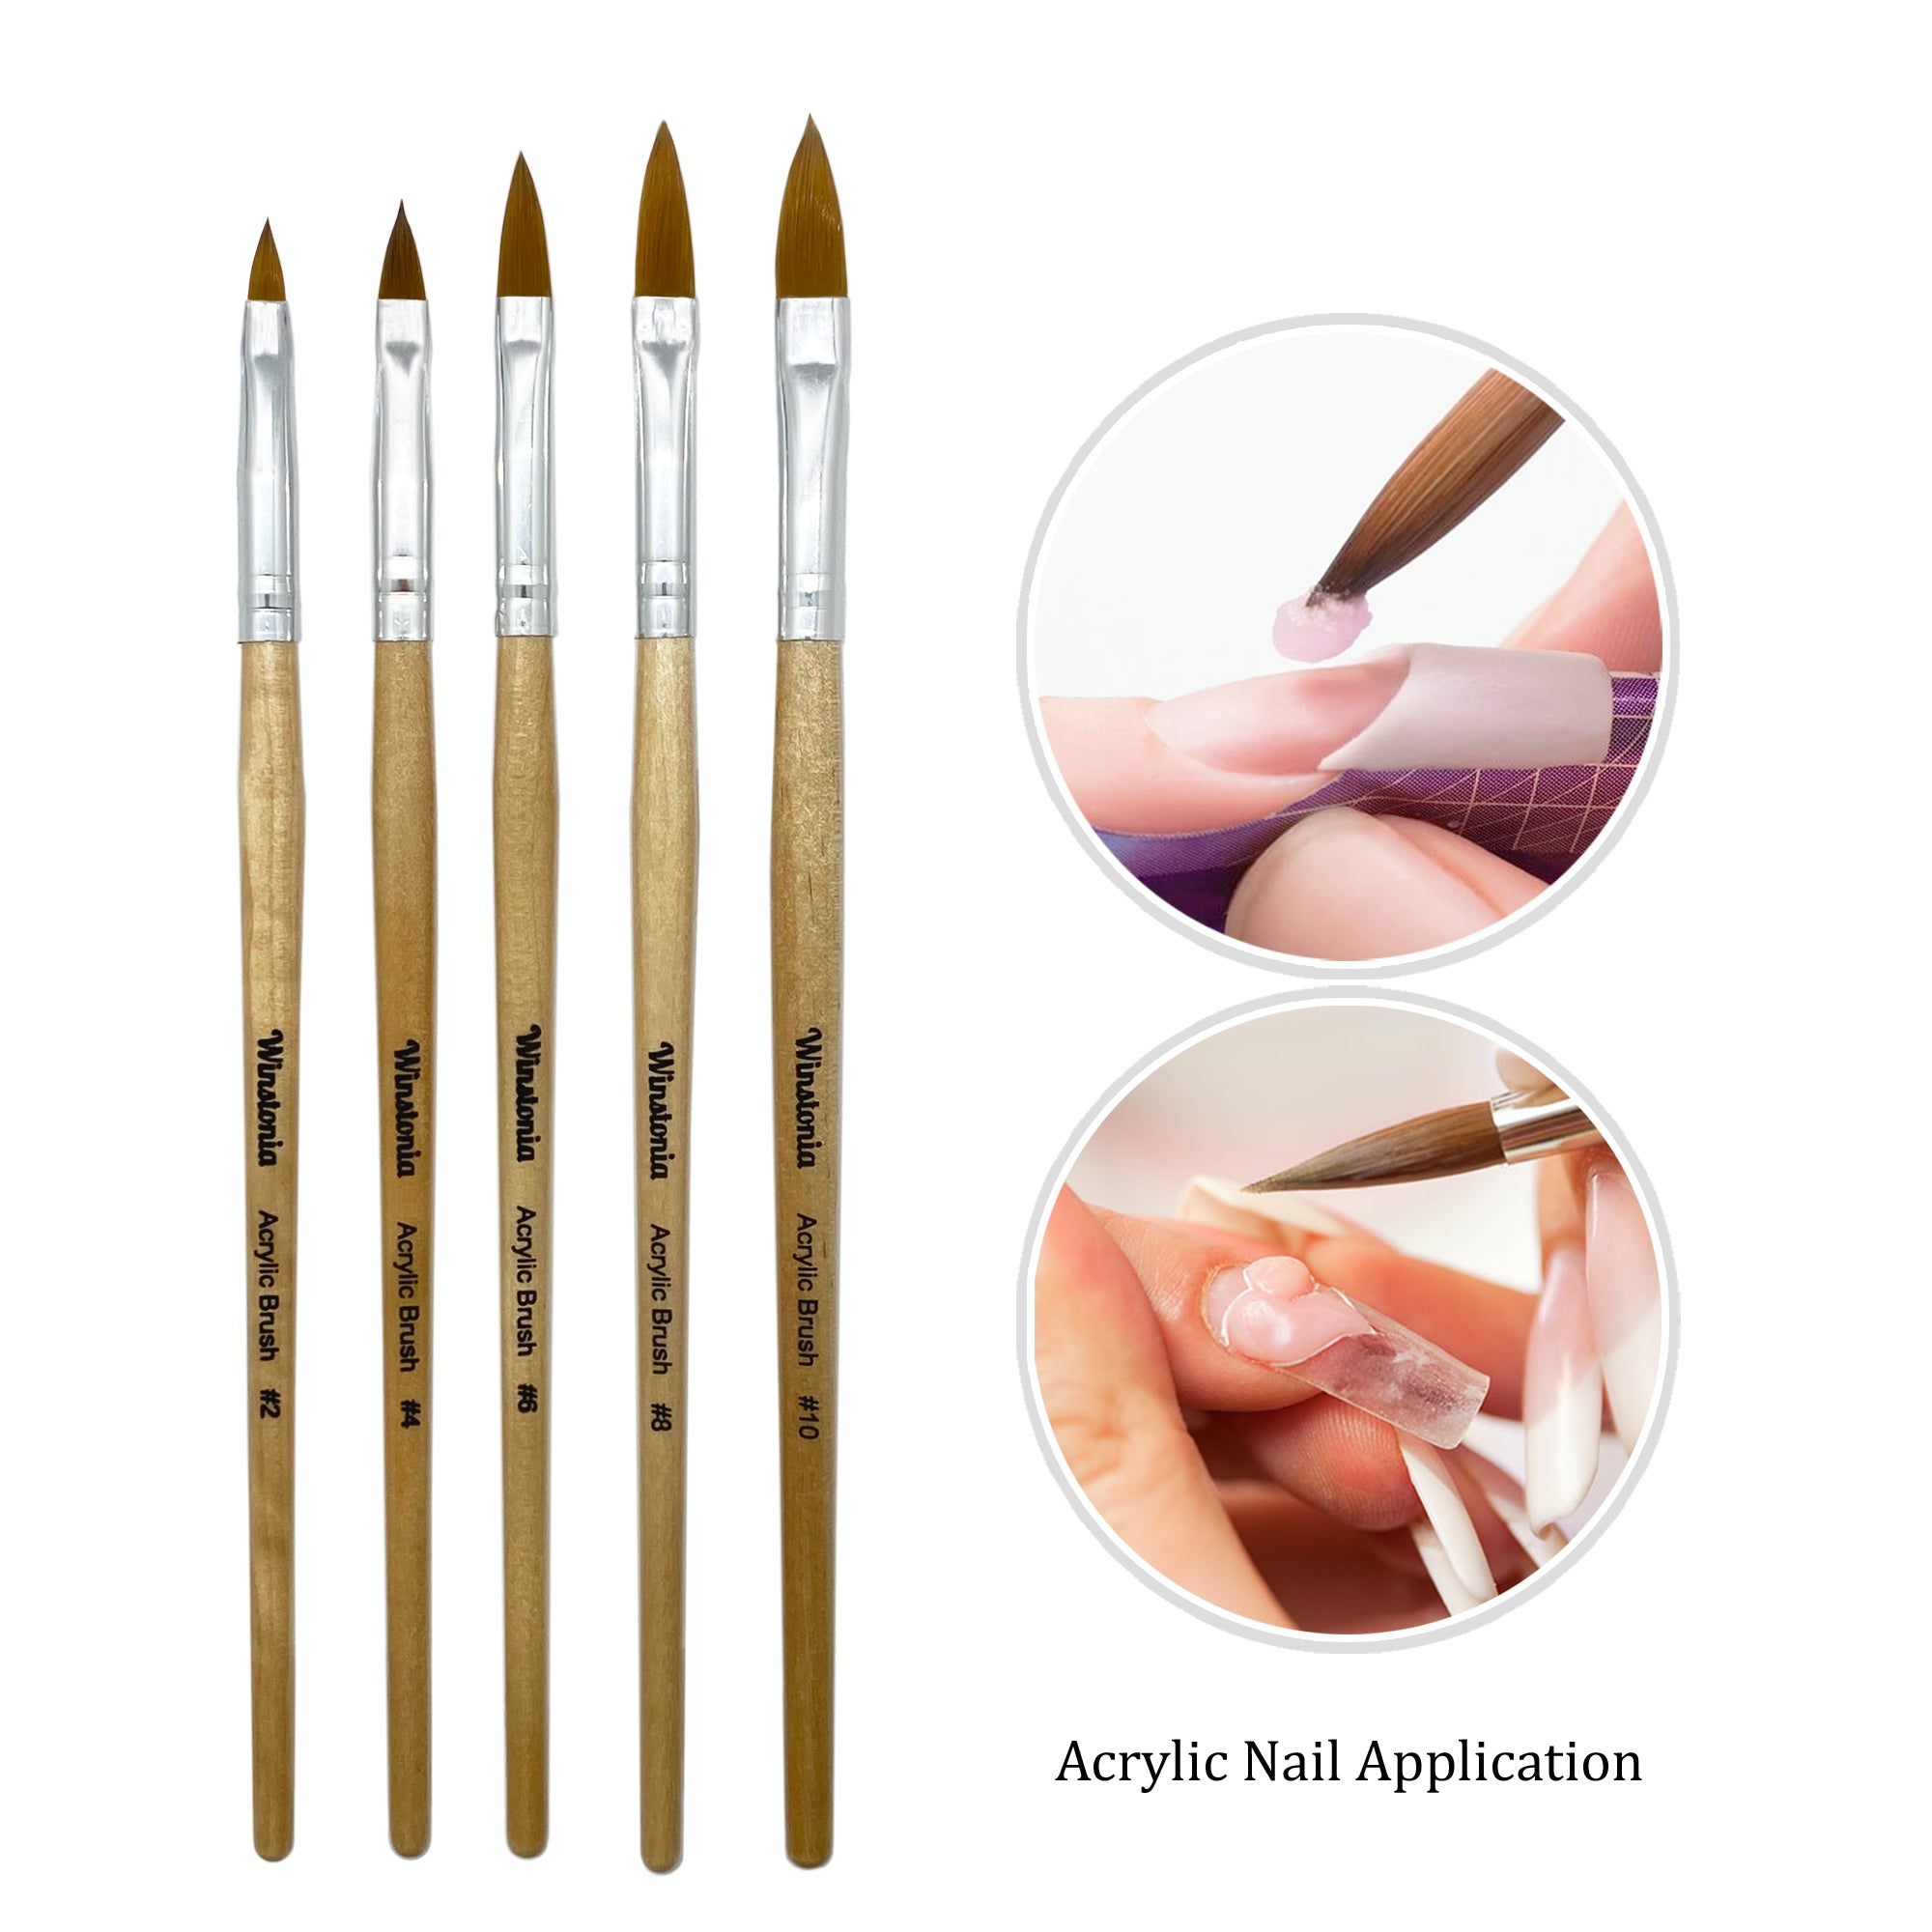 Shine Chance Acrylic Nail Brush Size 2, 100% Real Kolinsky Art Nail Brush  for Acrylic Powder Application, Handmade Women Manicure Nail Extension Tool  for Professional DIY Home Salon and Beginners #02